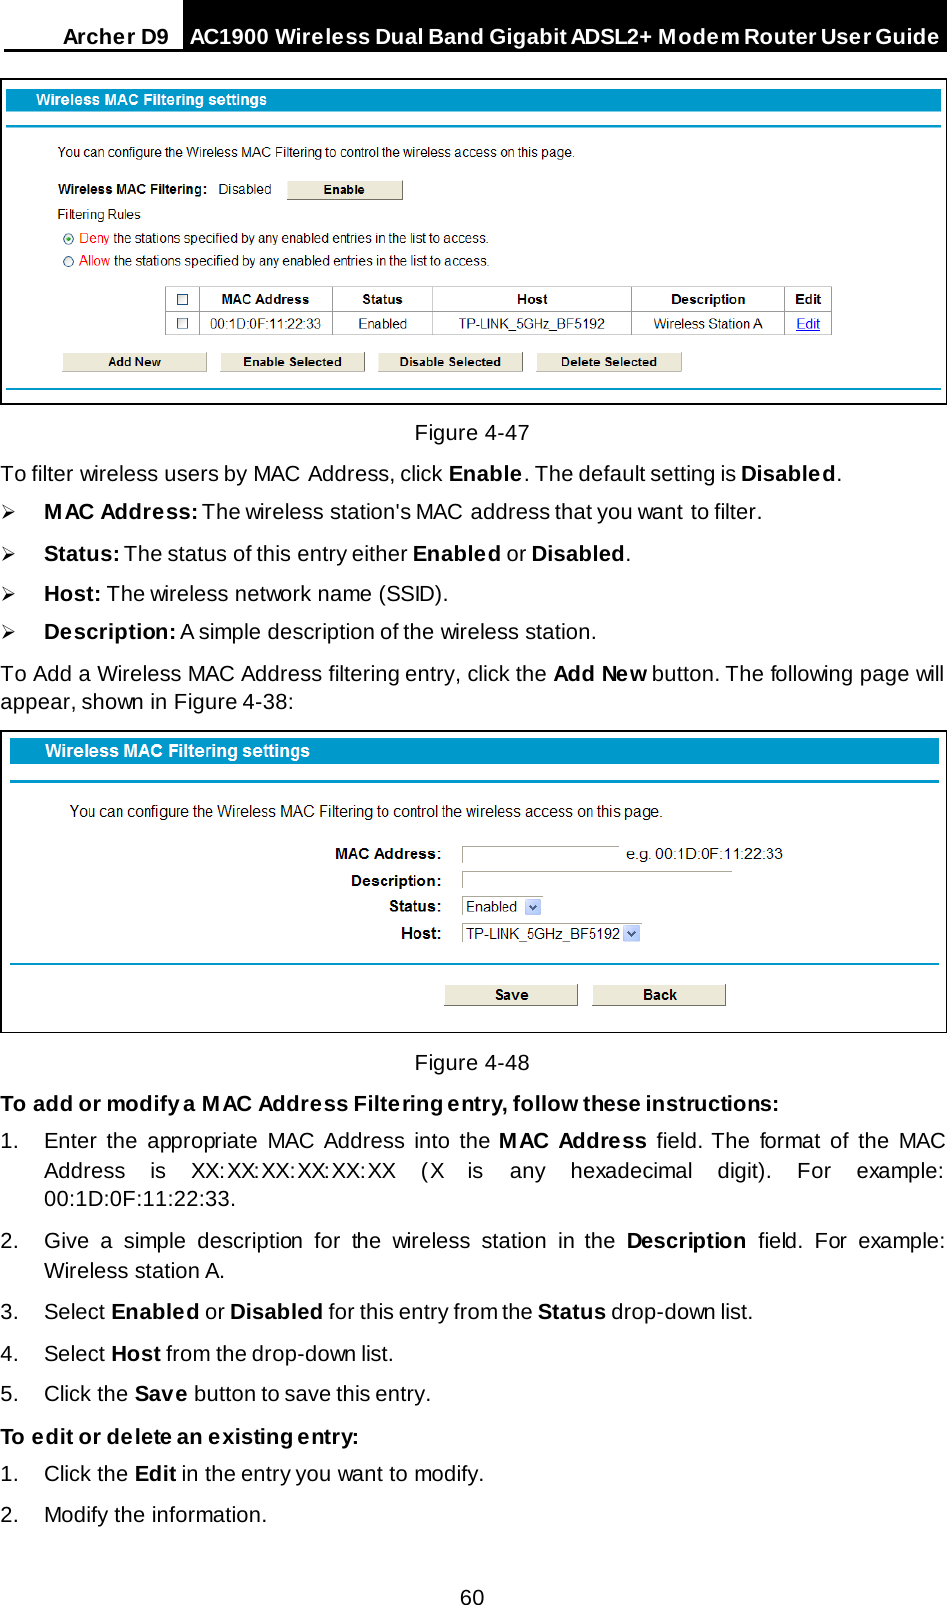 Arche r D9 AC1900 Wireless Dual Band Gigabit ADSL2+ Modem Router User Guide   Figure 4-47 To filter wireless users by MAC Address, click Enable. The default setting is Disabled.  M AC Addre ss: The wireless station&apos;s MAC address that you want to filter.    Status: The status of this entry either Enabled or Disabled.  Host: The wireless network name (SSID).  Description: A simple description of the wireless station.   To Add a Wireless MAC Address filtering entry, click the Add New button. The following page will appear, shown in Figure 4-38:  Figure 4-48 To add or modify a MAC Address Filtering entry, follow these instructions: 1. Enter the appropriate MAC Address into the M AC Addre ss field. The format of the MAC Address is XX:XX:XX:XX:XX:XX (X is any hexadecimal digit). For example: 00:1D:0F:11:22:33.  2. Give a simple description for the wireless station in the Description field. For example: Wireless station A. 3. Select Enabled or Disabled for this entry from the Status drop-down list. 4. Select Host from the drop-down list. 5. Click the Save button to save this entry. To edit or delete an existing entry: 1. Click the Edit in the entry you want to modify. 2. Modify the information.  60 